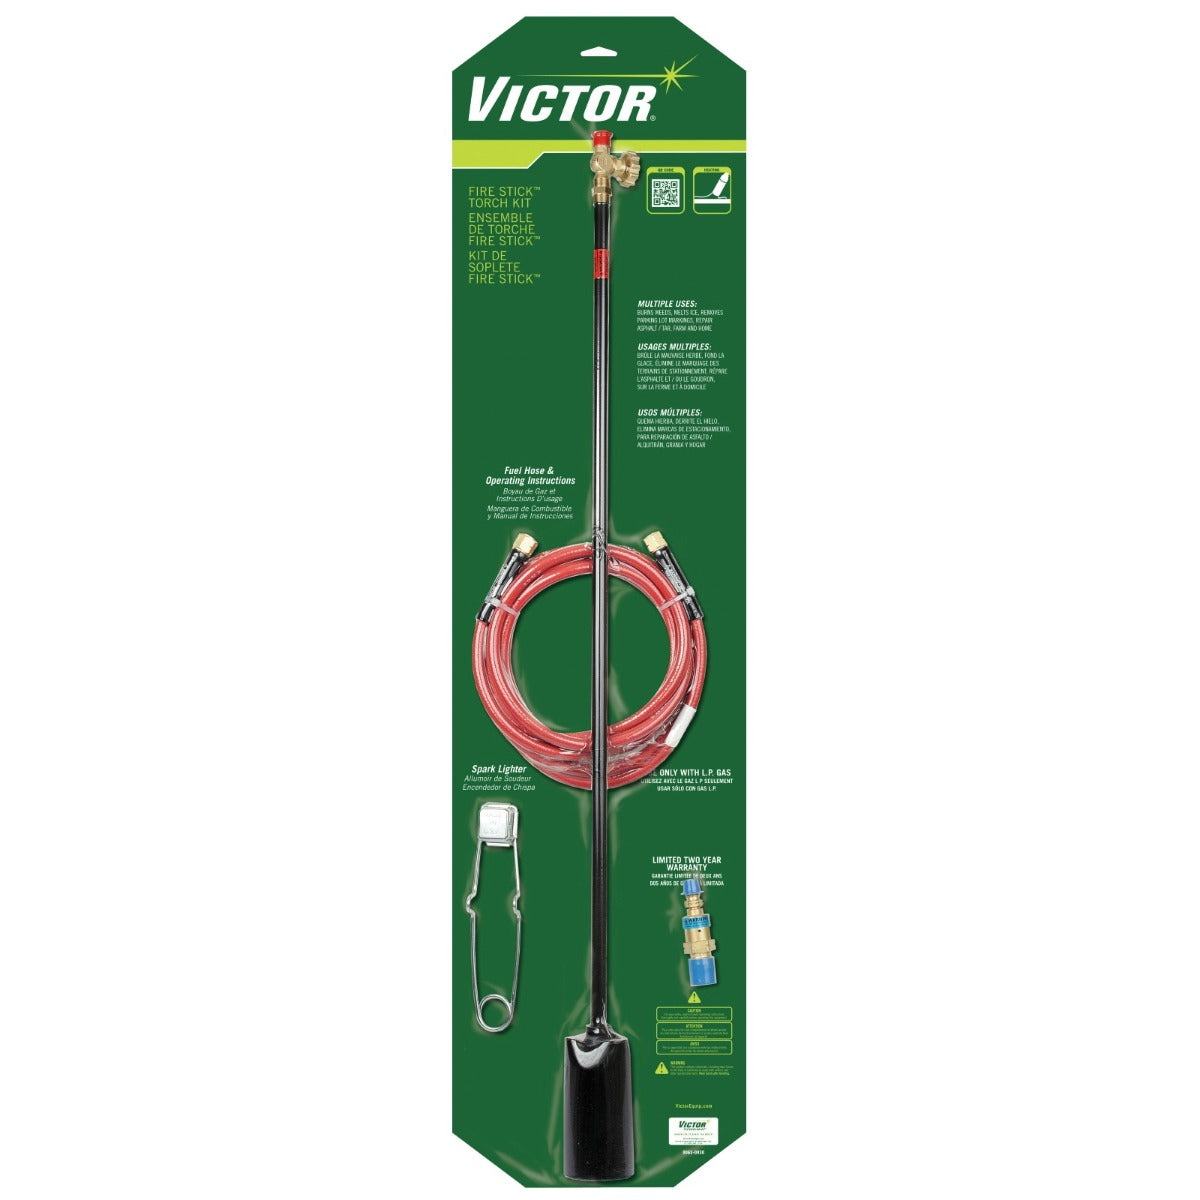 Victor Fire-Stick Weed Burner & Heating Torch (0384-1261)